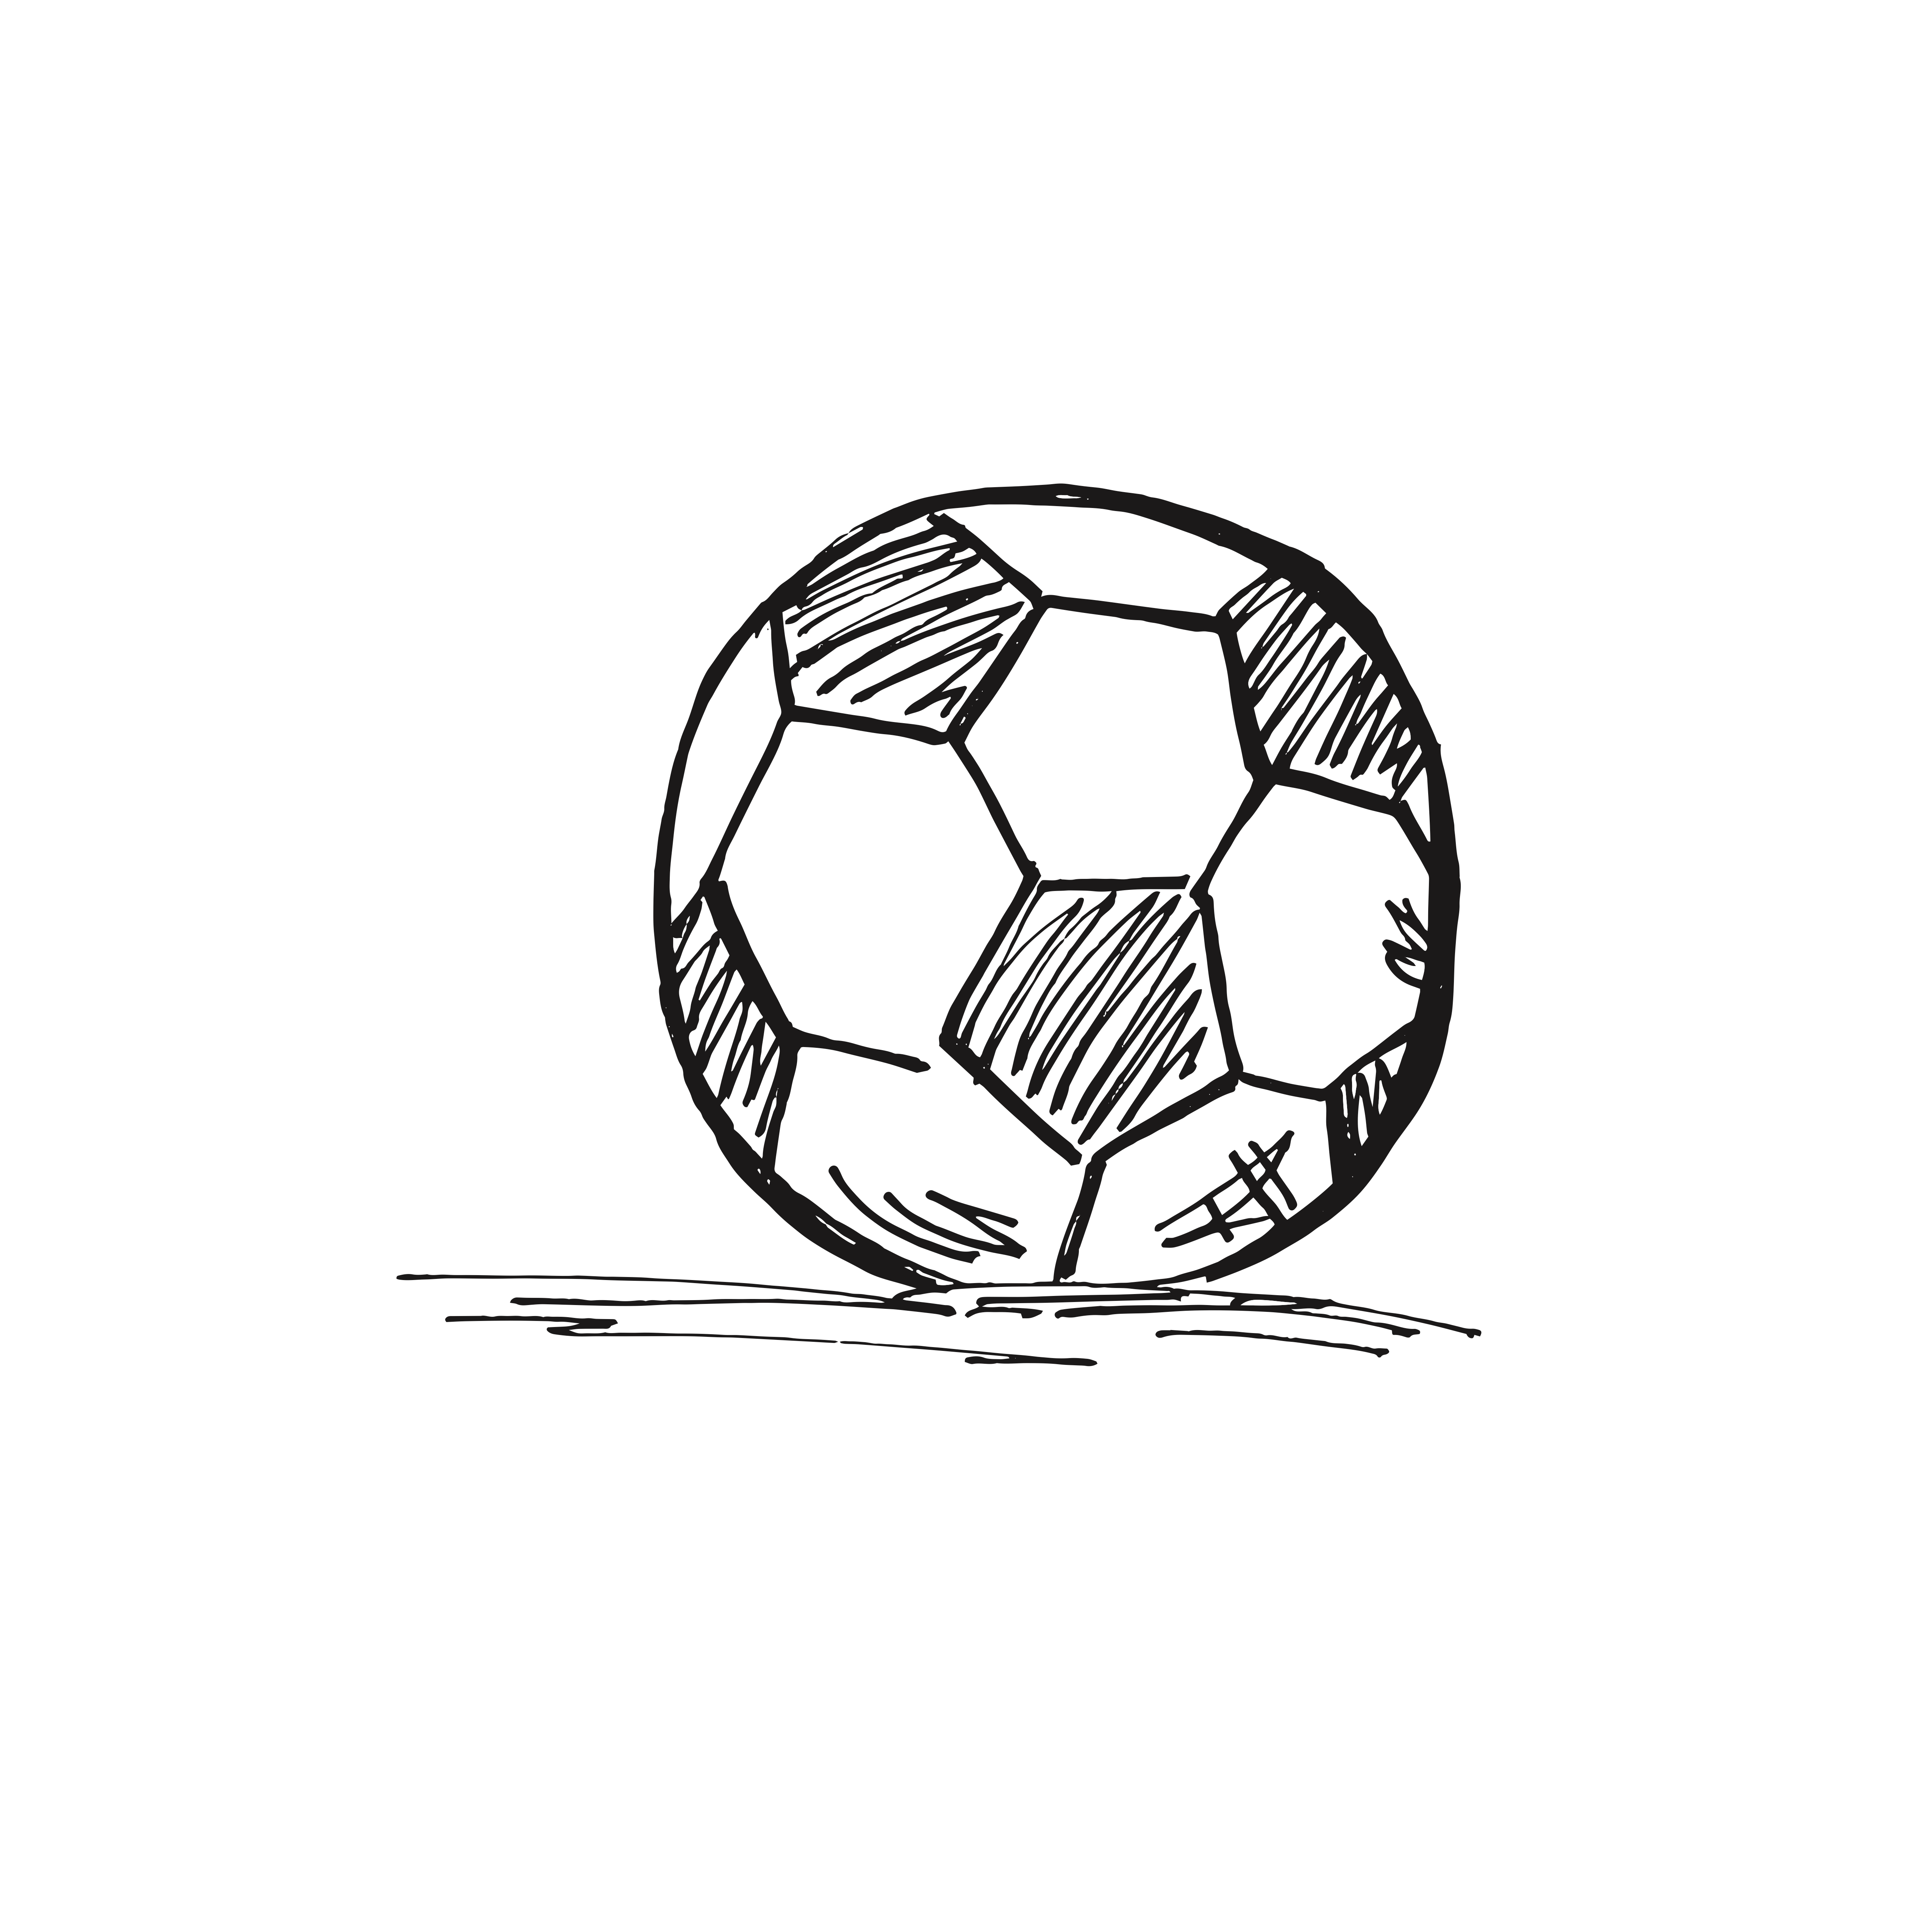 Hand sketch soccer player Royalty Free Vector Image